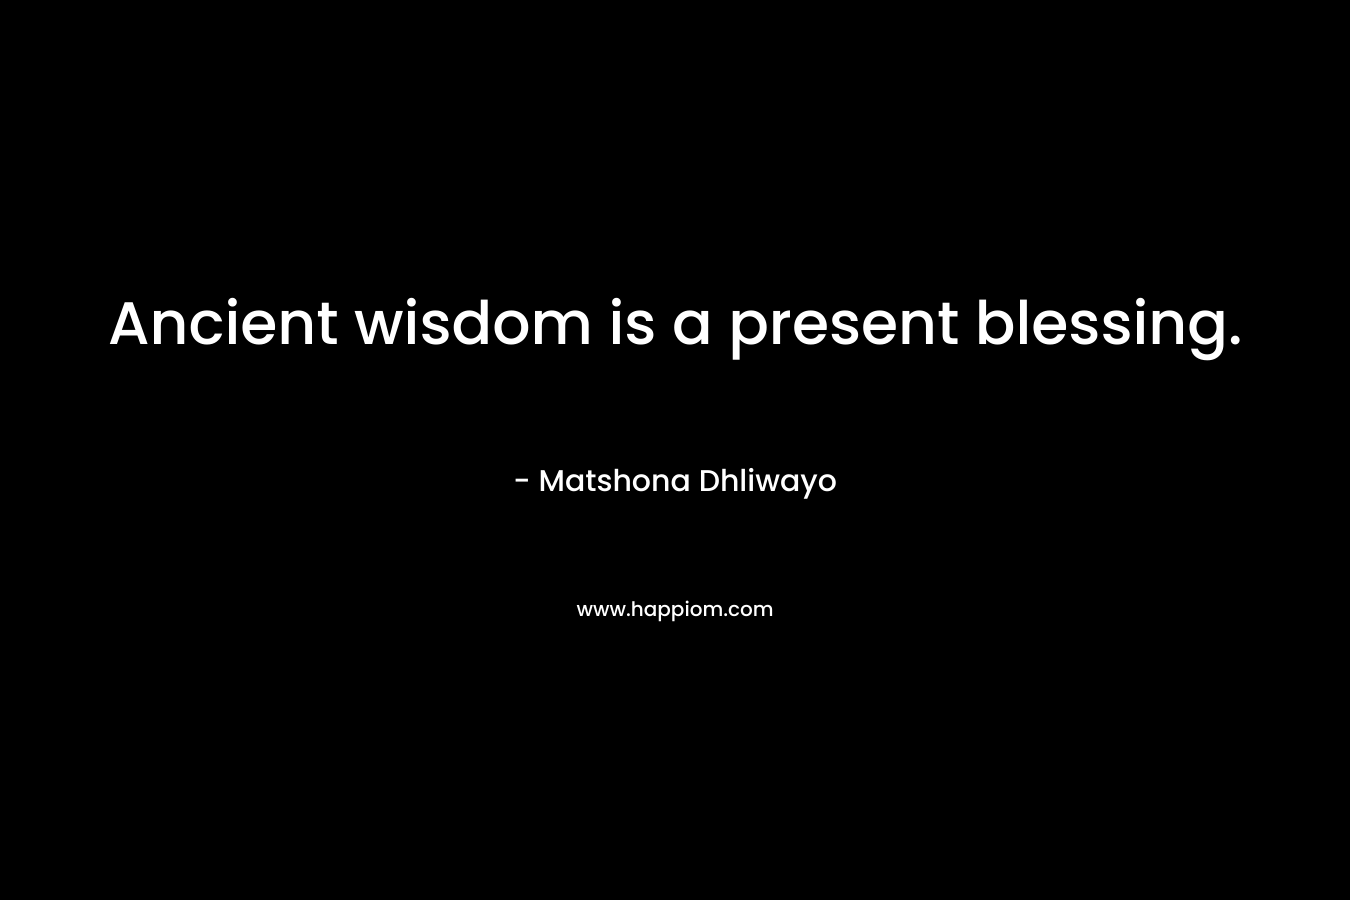 Ancient wisdom is a present blessing.